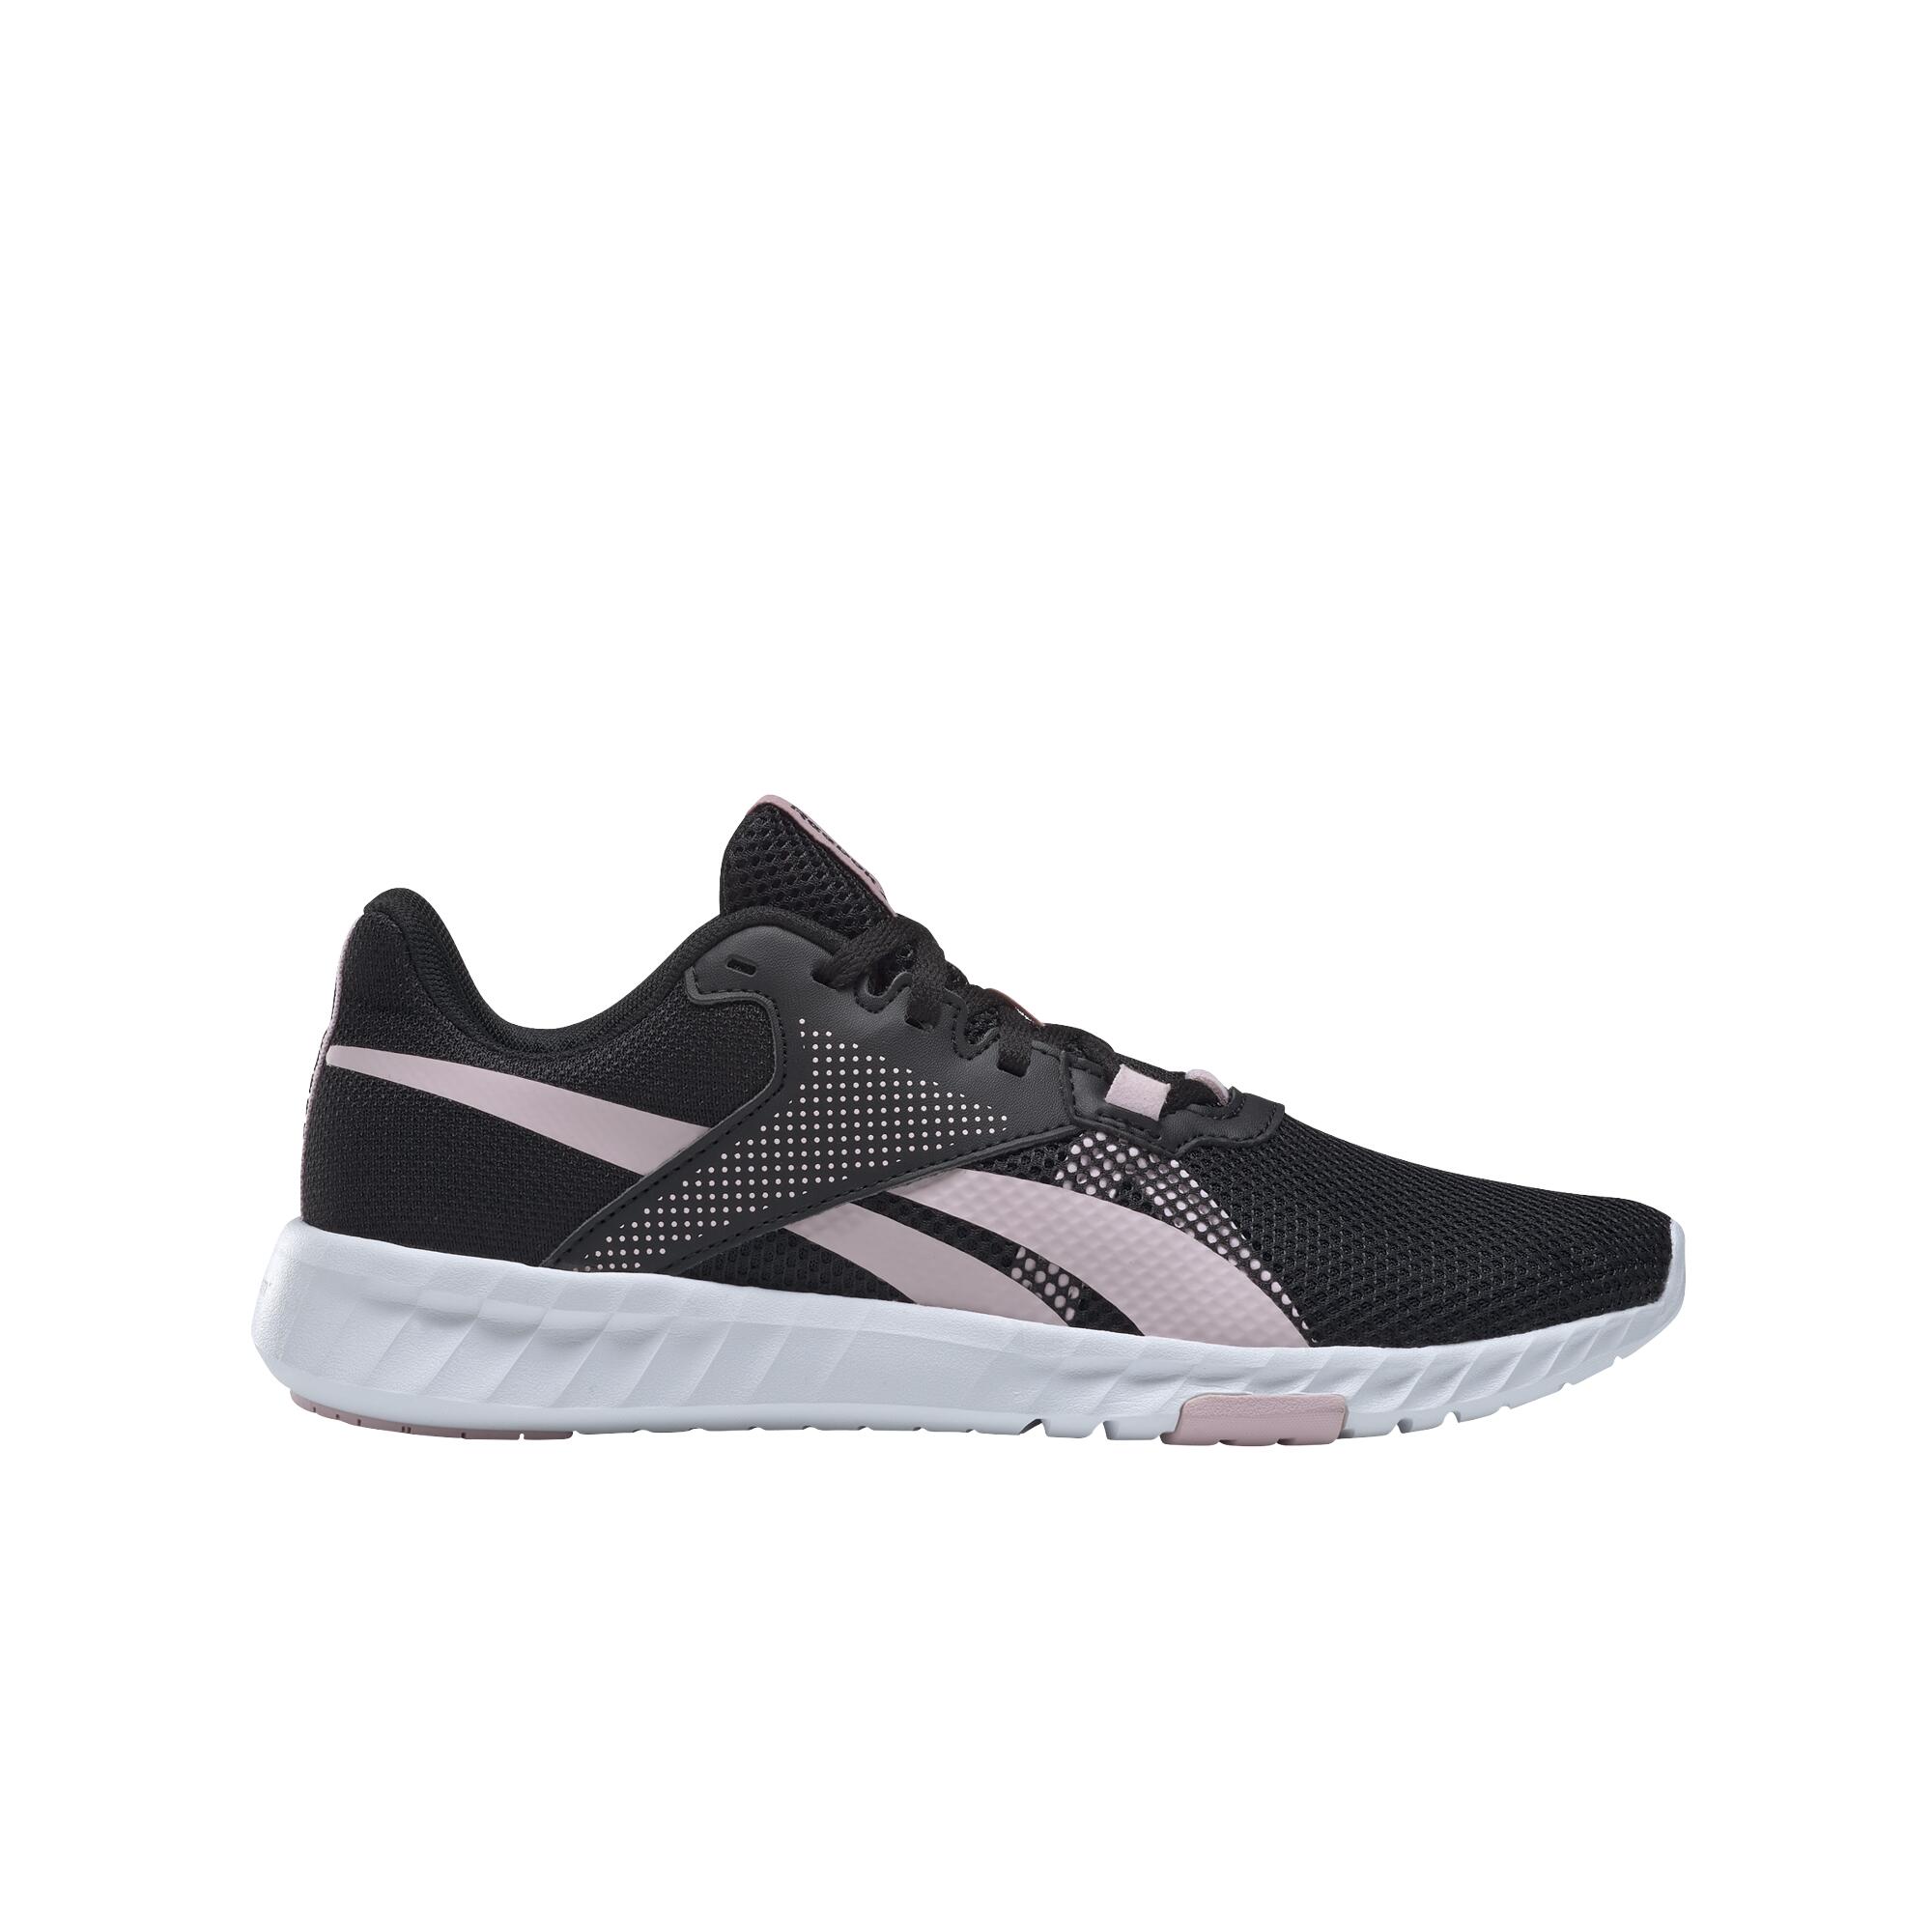 Women's Fitness Shoes 1/6